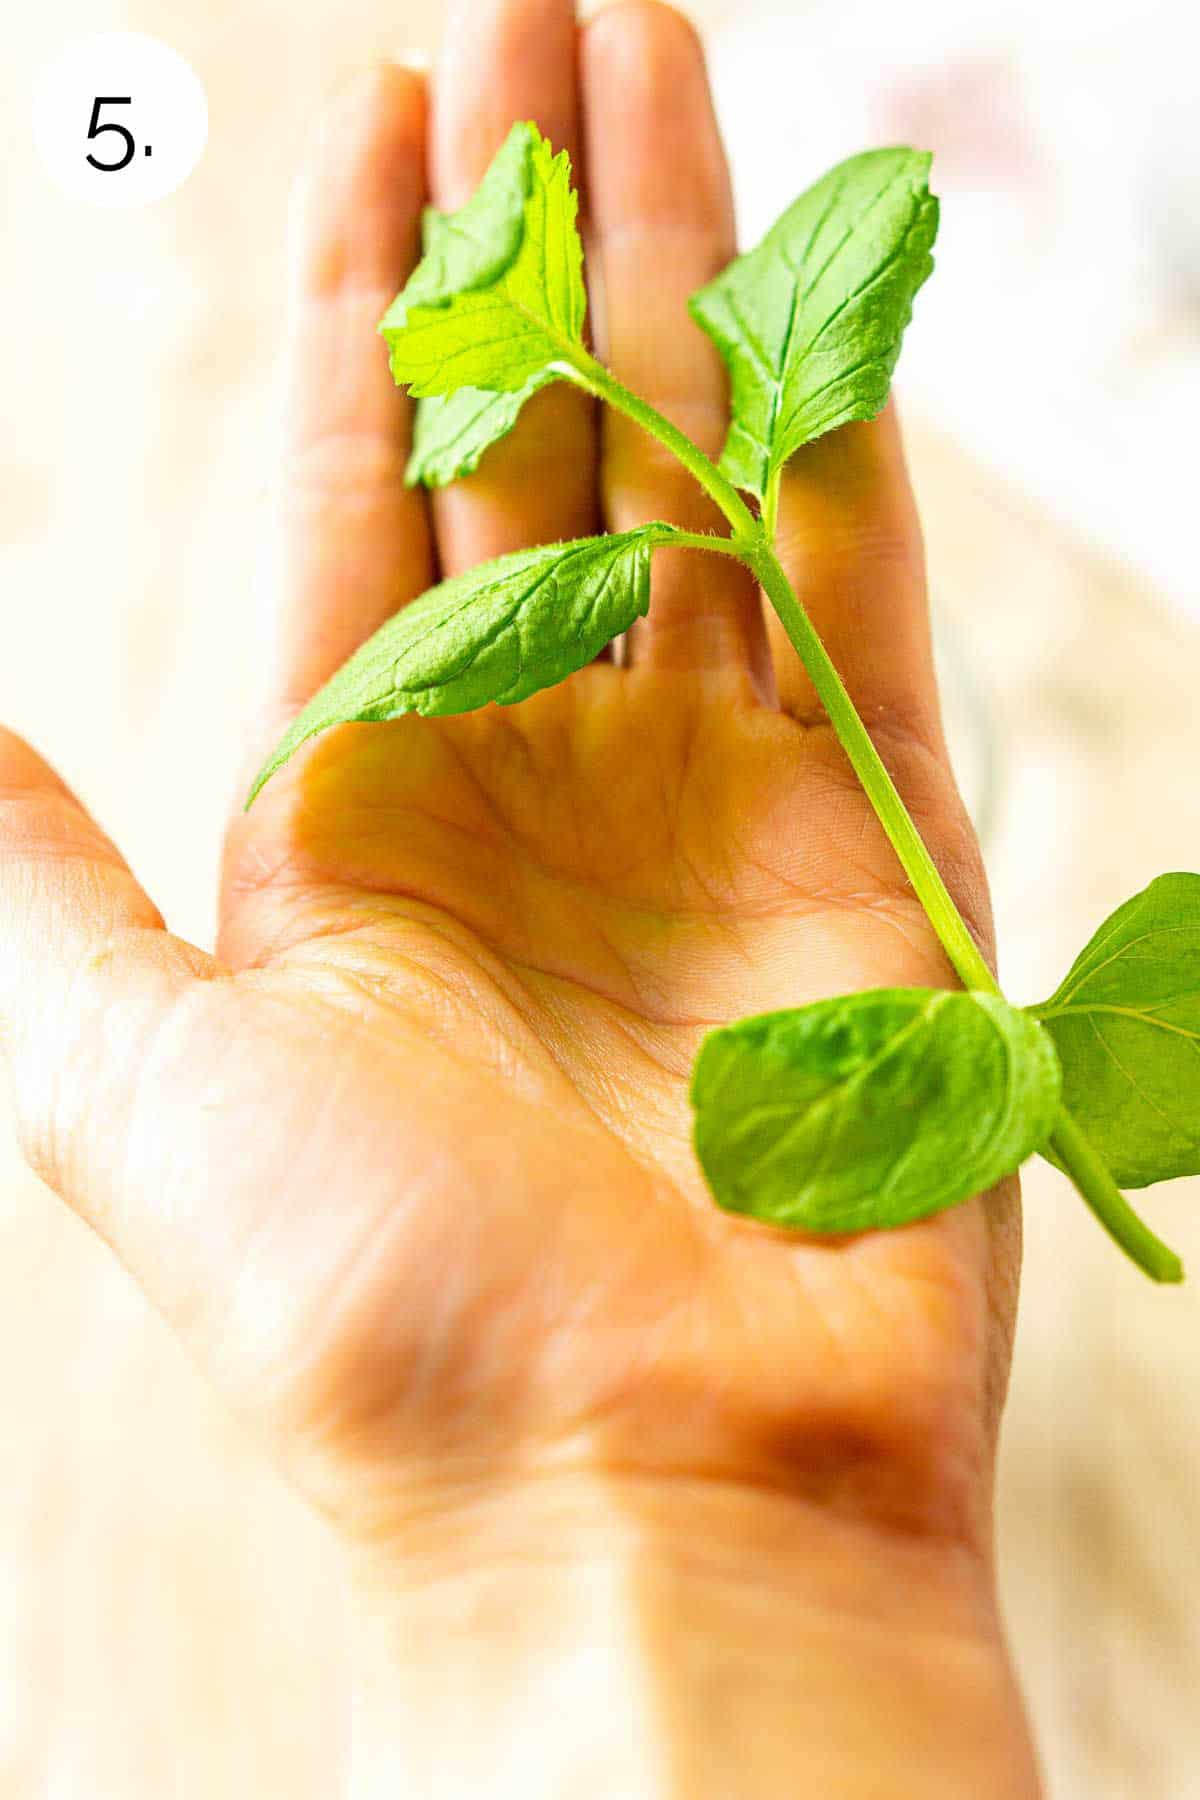 A hand holding a fresh mint sprig before clapping the other hand on top to release its fragrance for garnishing.